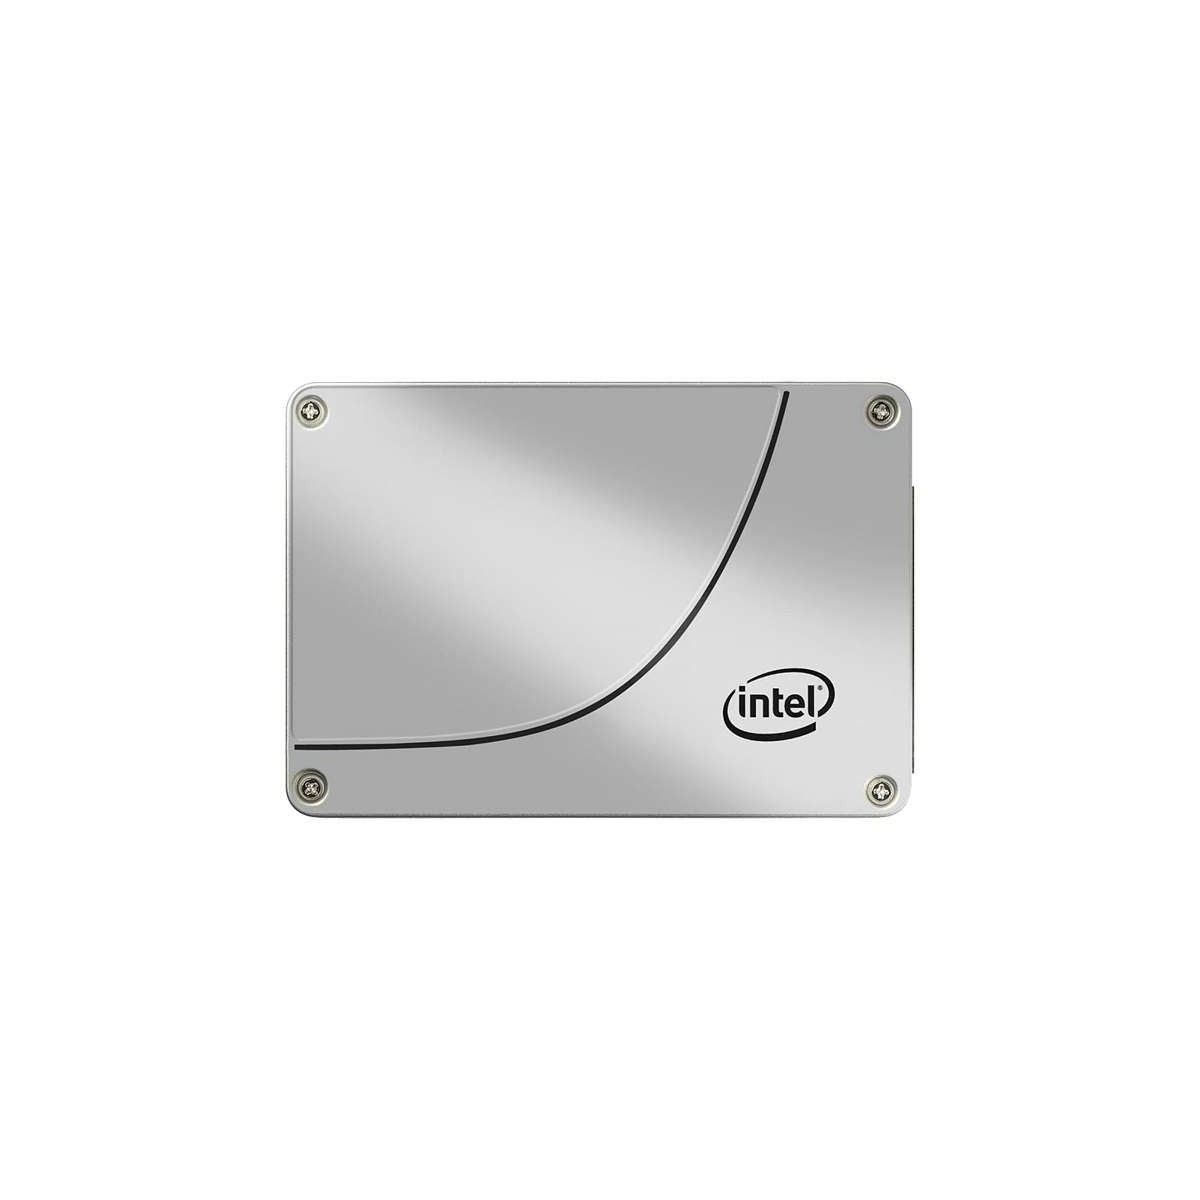 Intel Solid-State Drive DC S3610 Series 2.5 SATA 800 GB - Solid State Disk - Internal